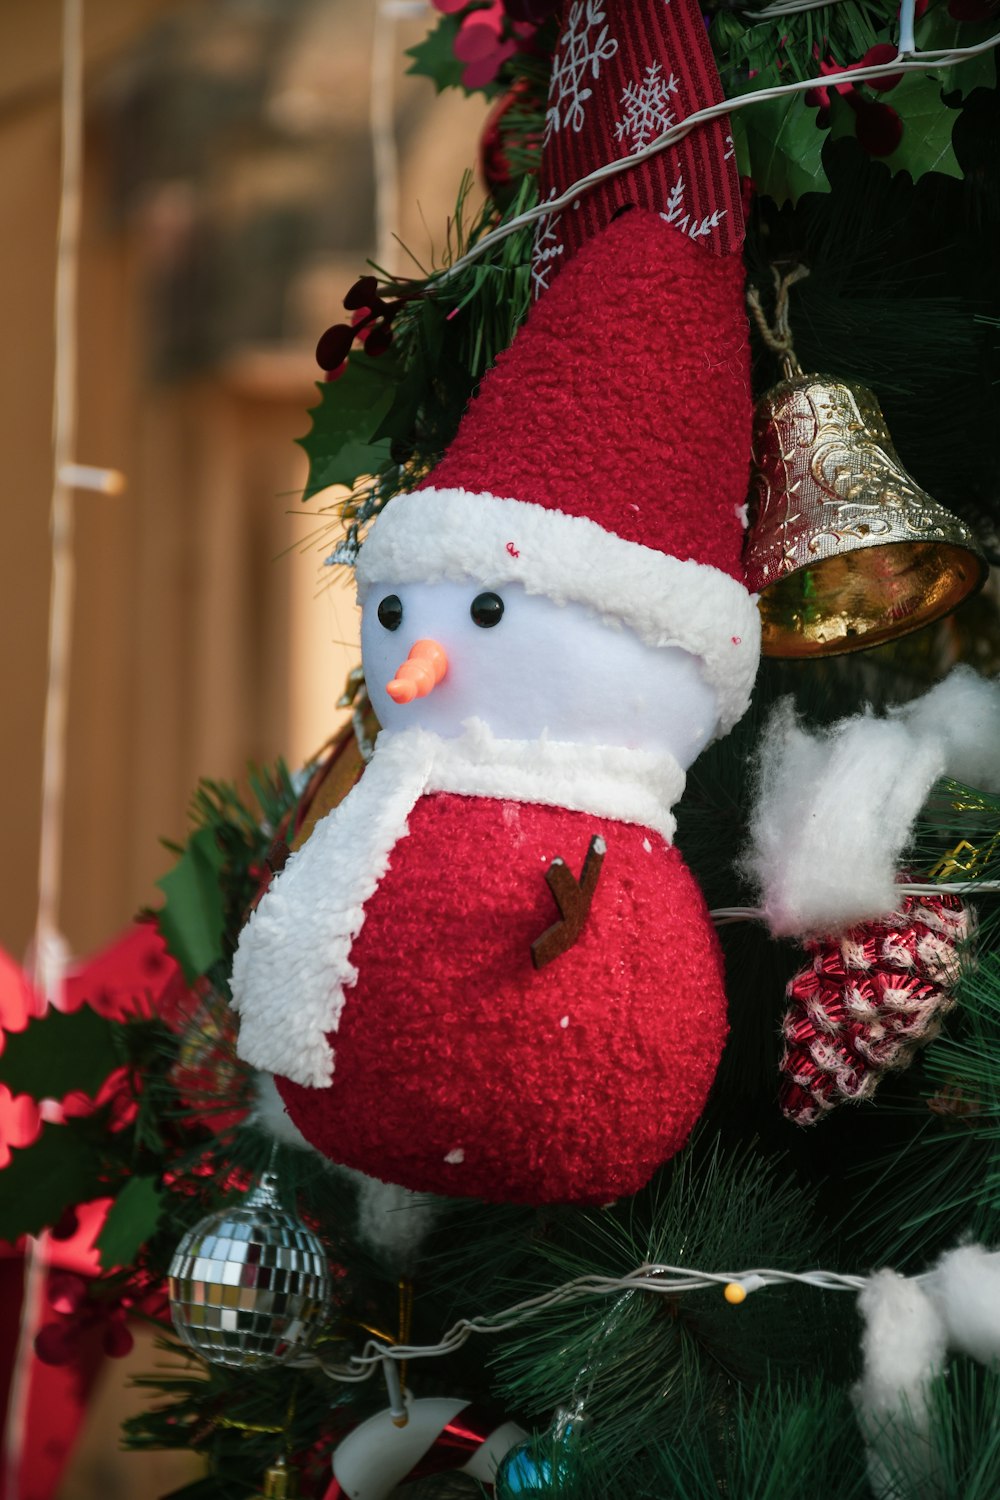 a snowman ornament hanging from a christmas tree